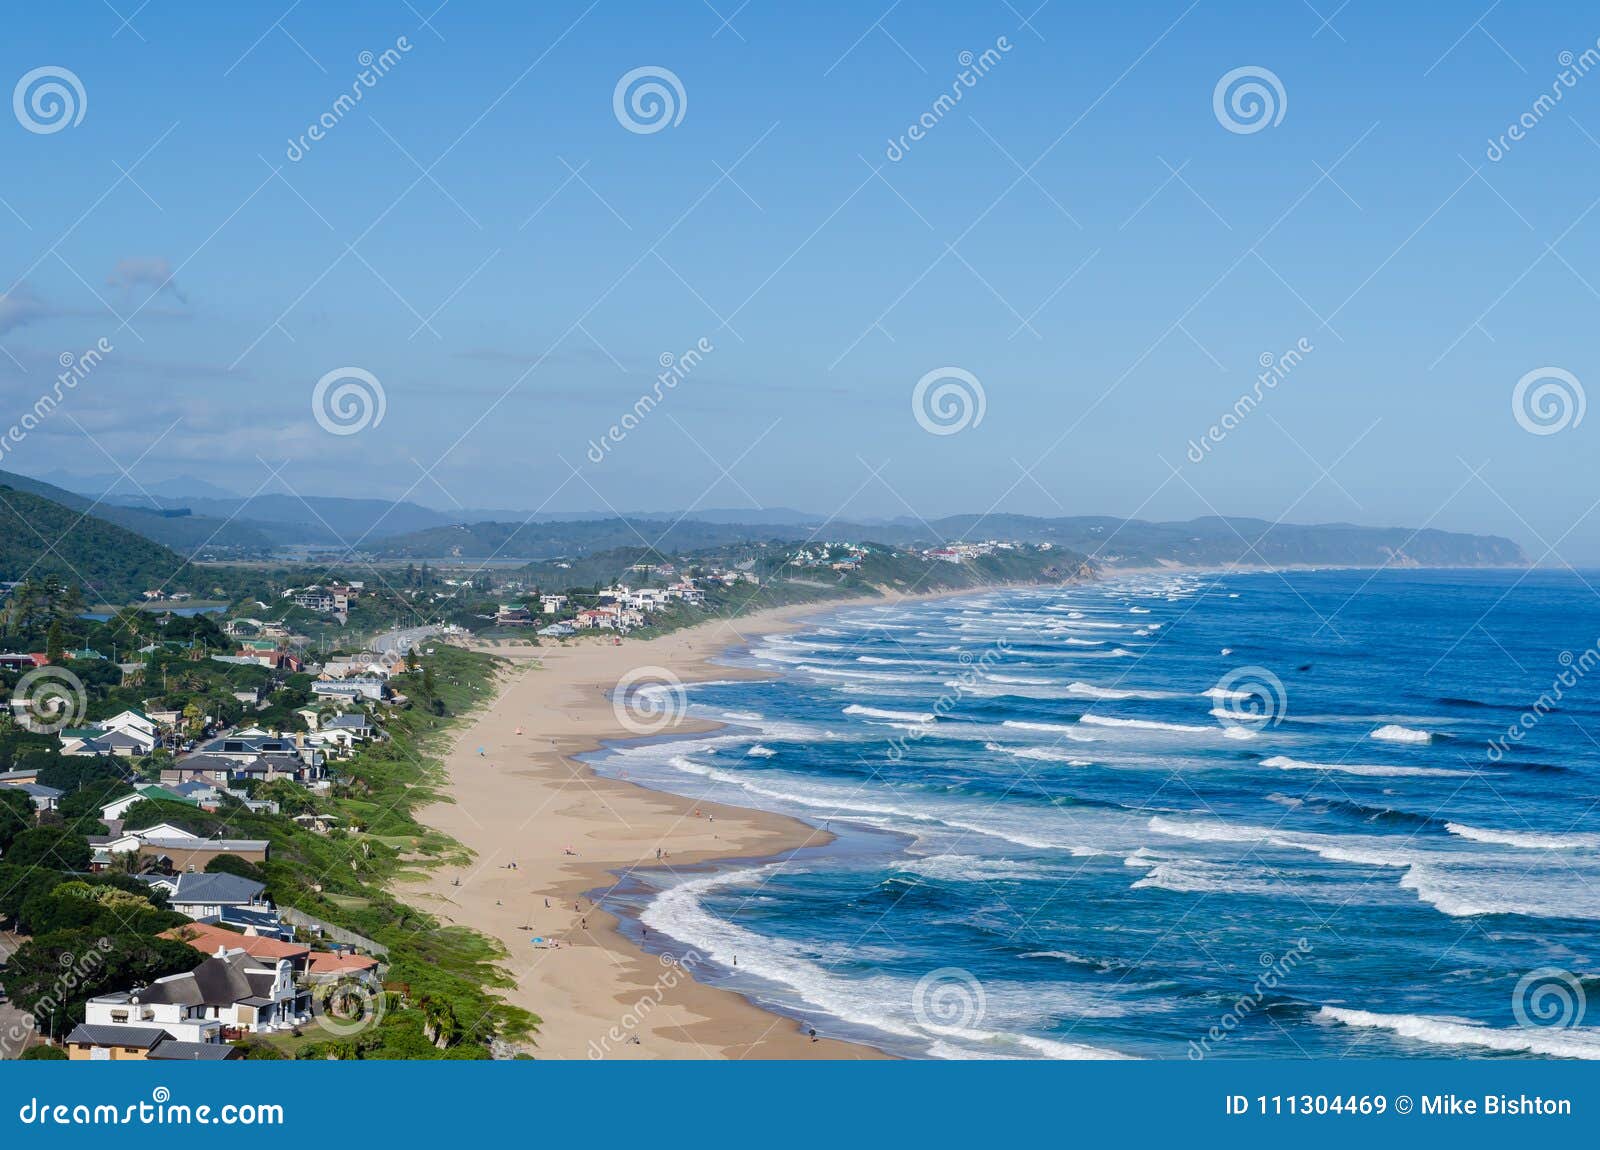 elevated view of wilderness beach, garden route in south africa